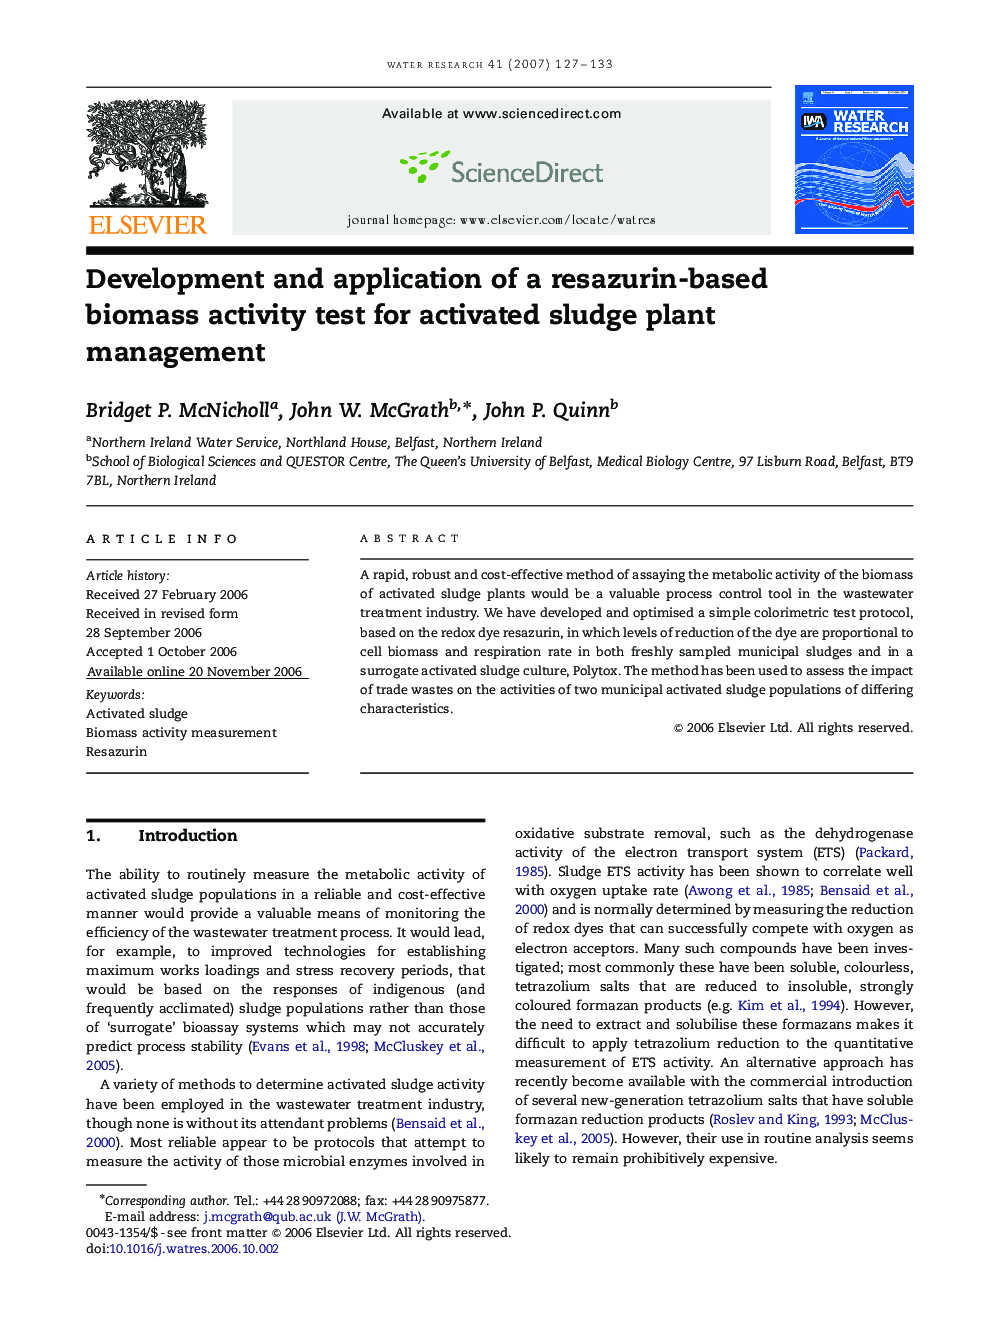 Development and application of a resazurin-based biomass activity test for activated sludge plant management